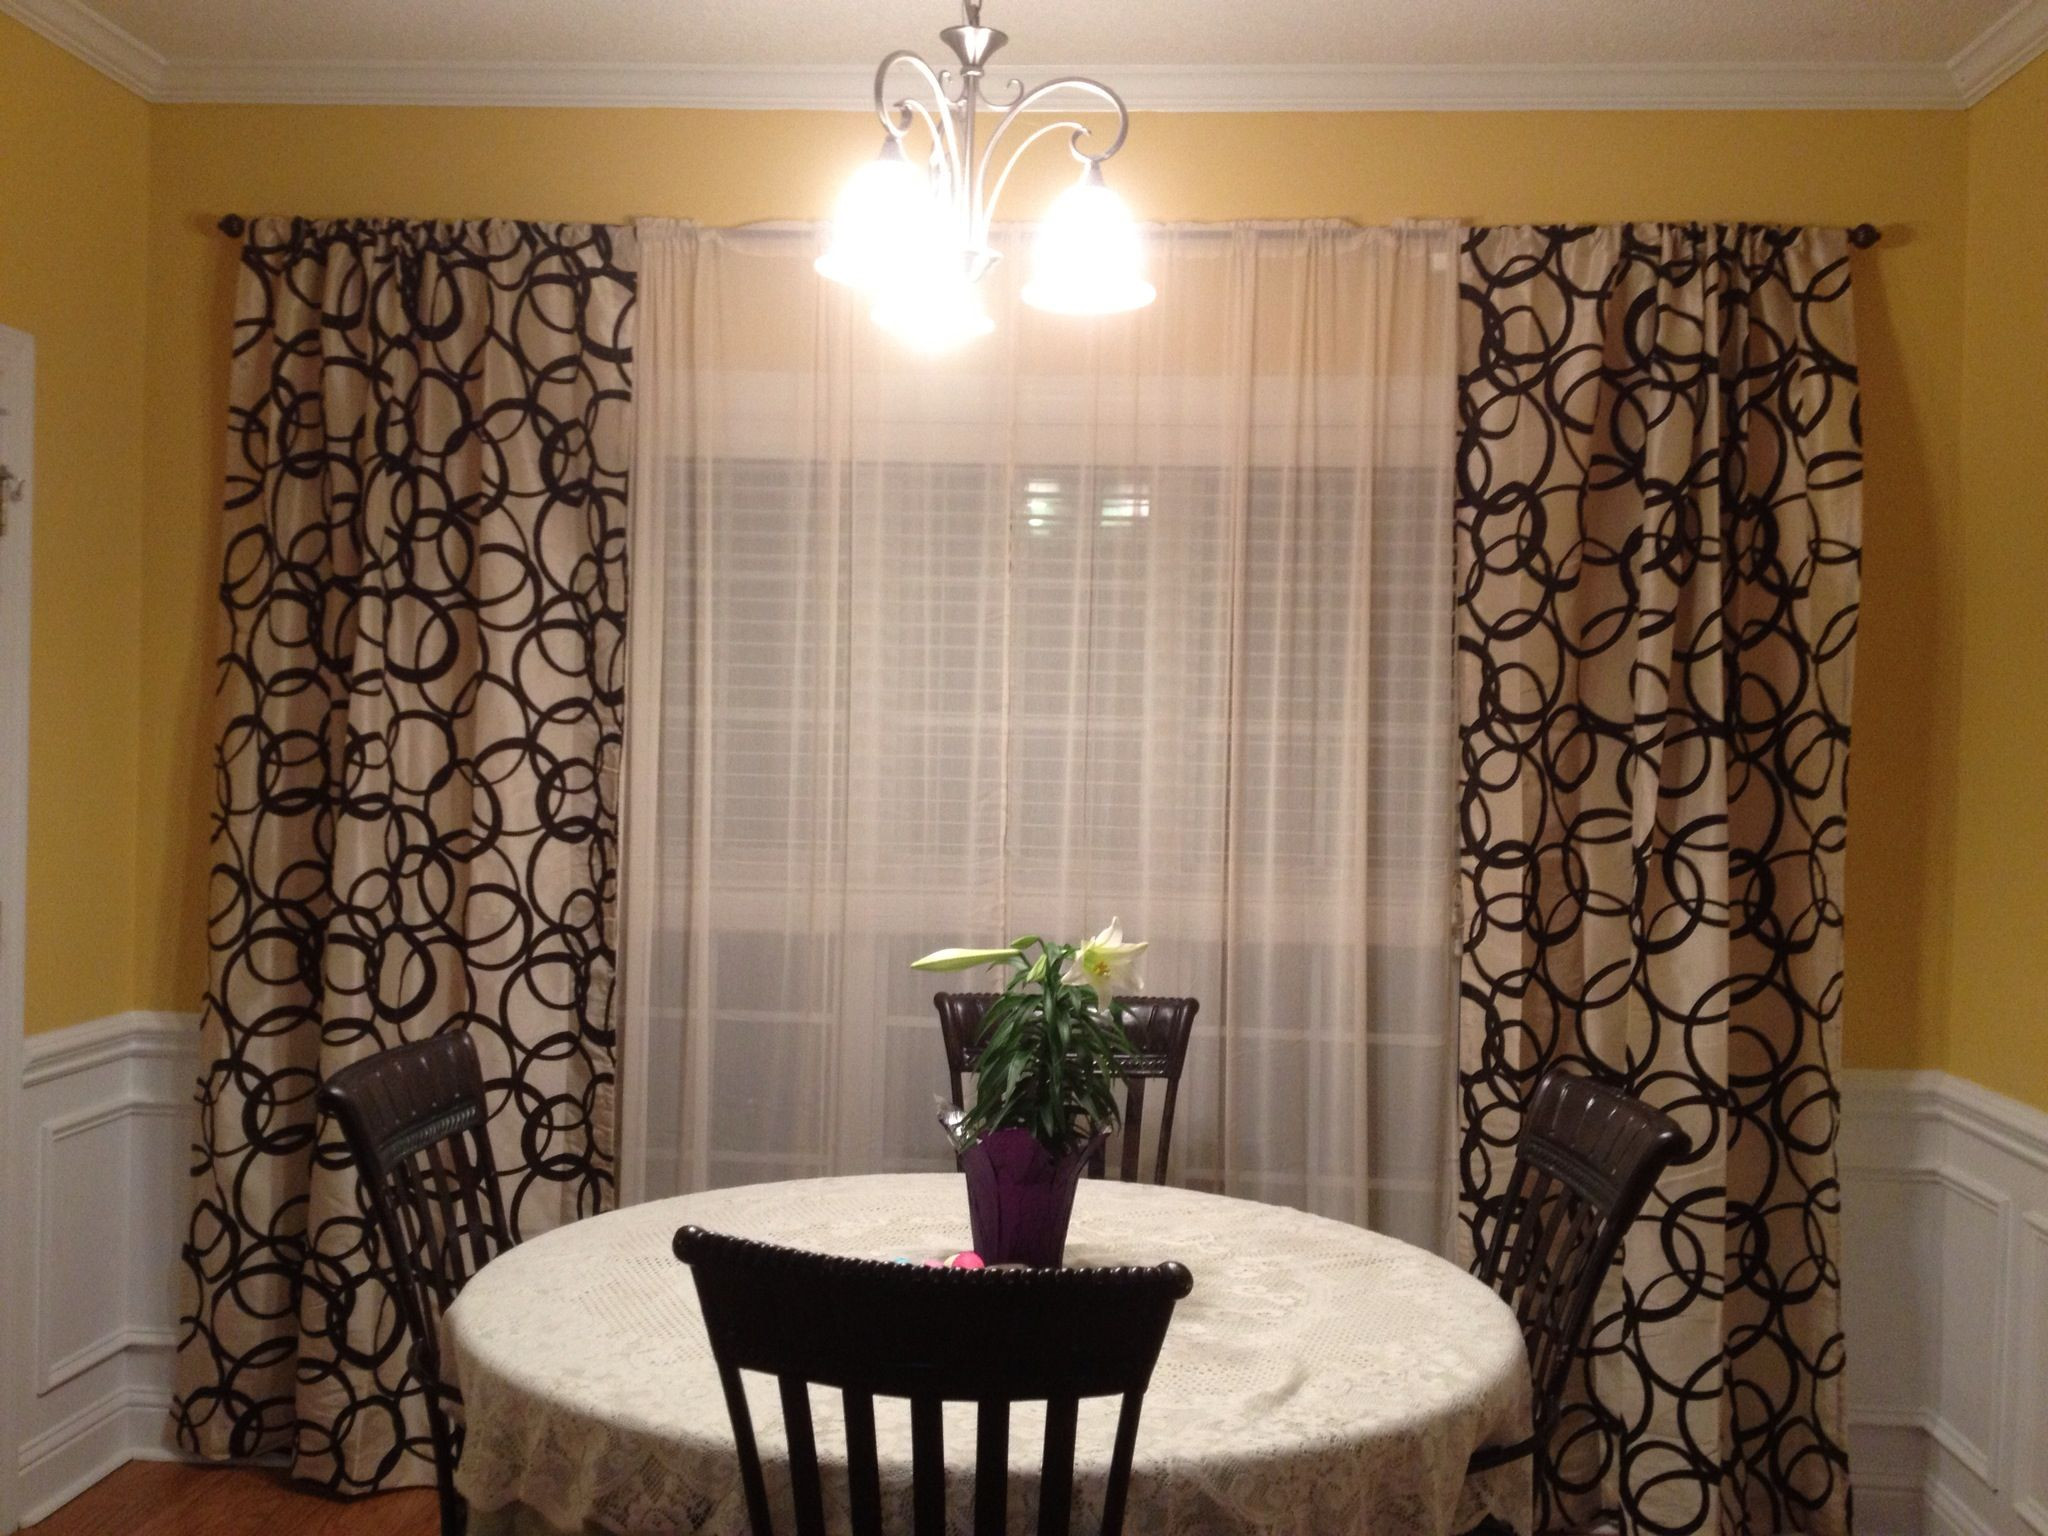 Overstock Kitchen Curtains
 New curtains for the kitchen Print from overstock and